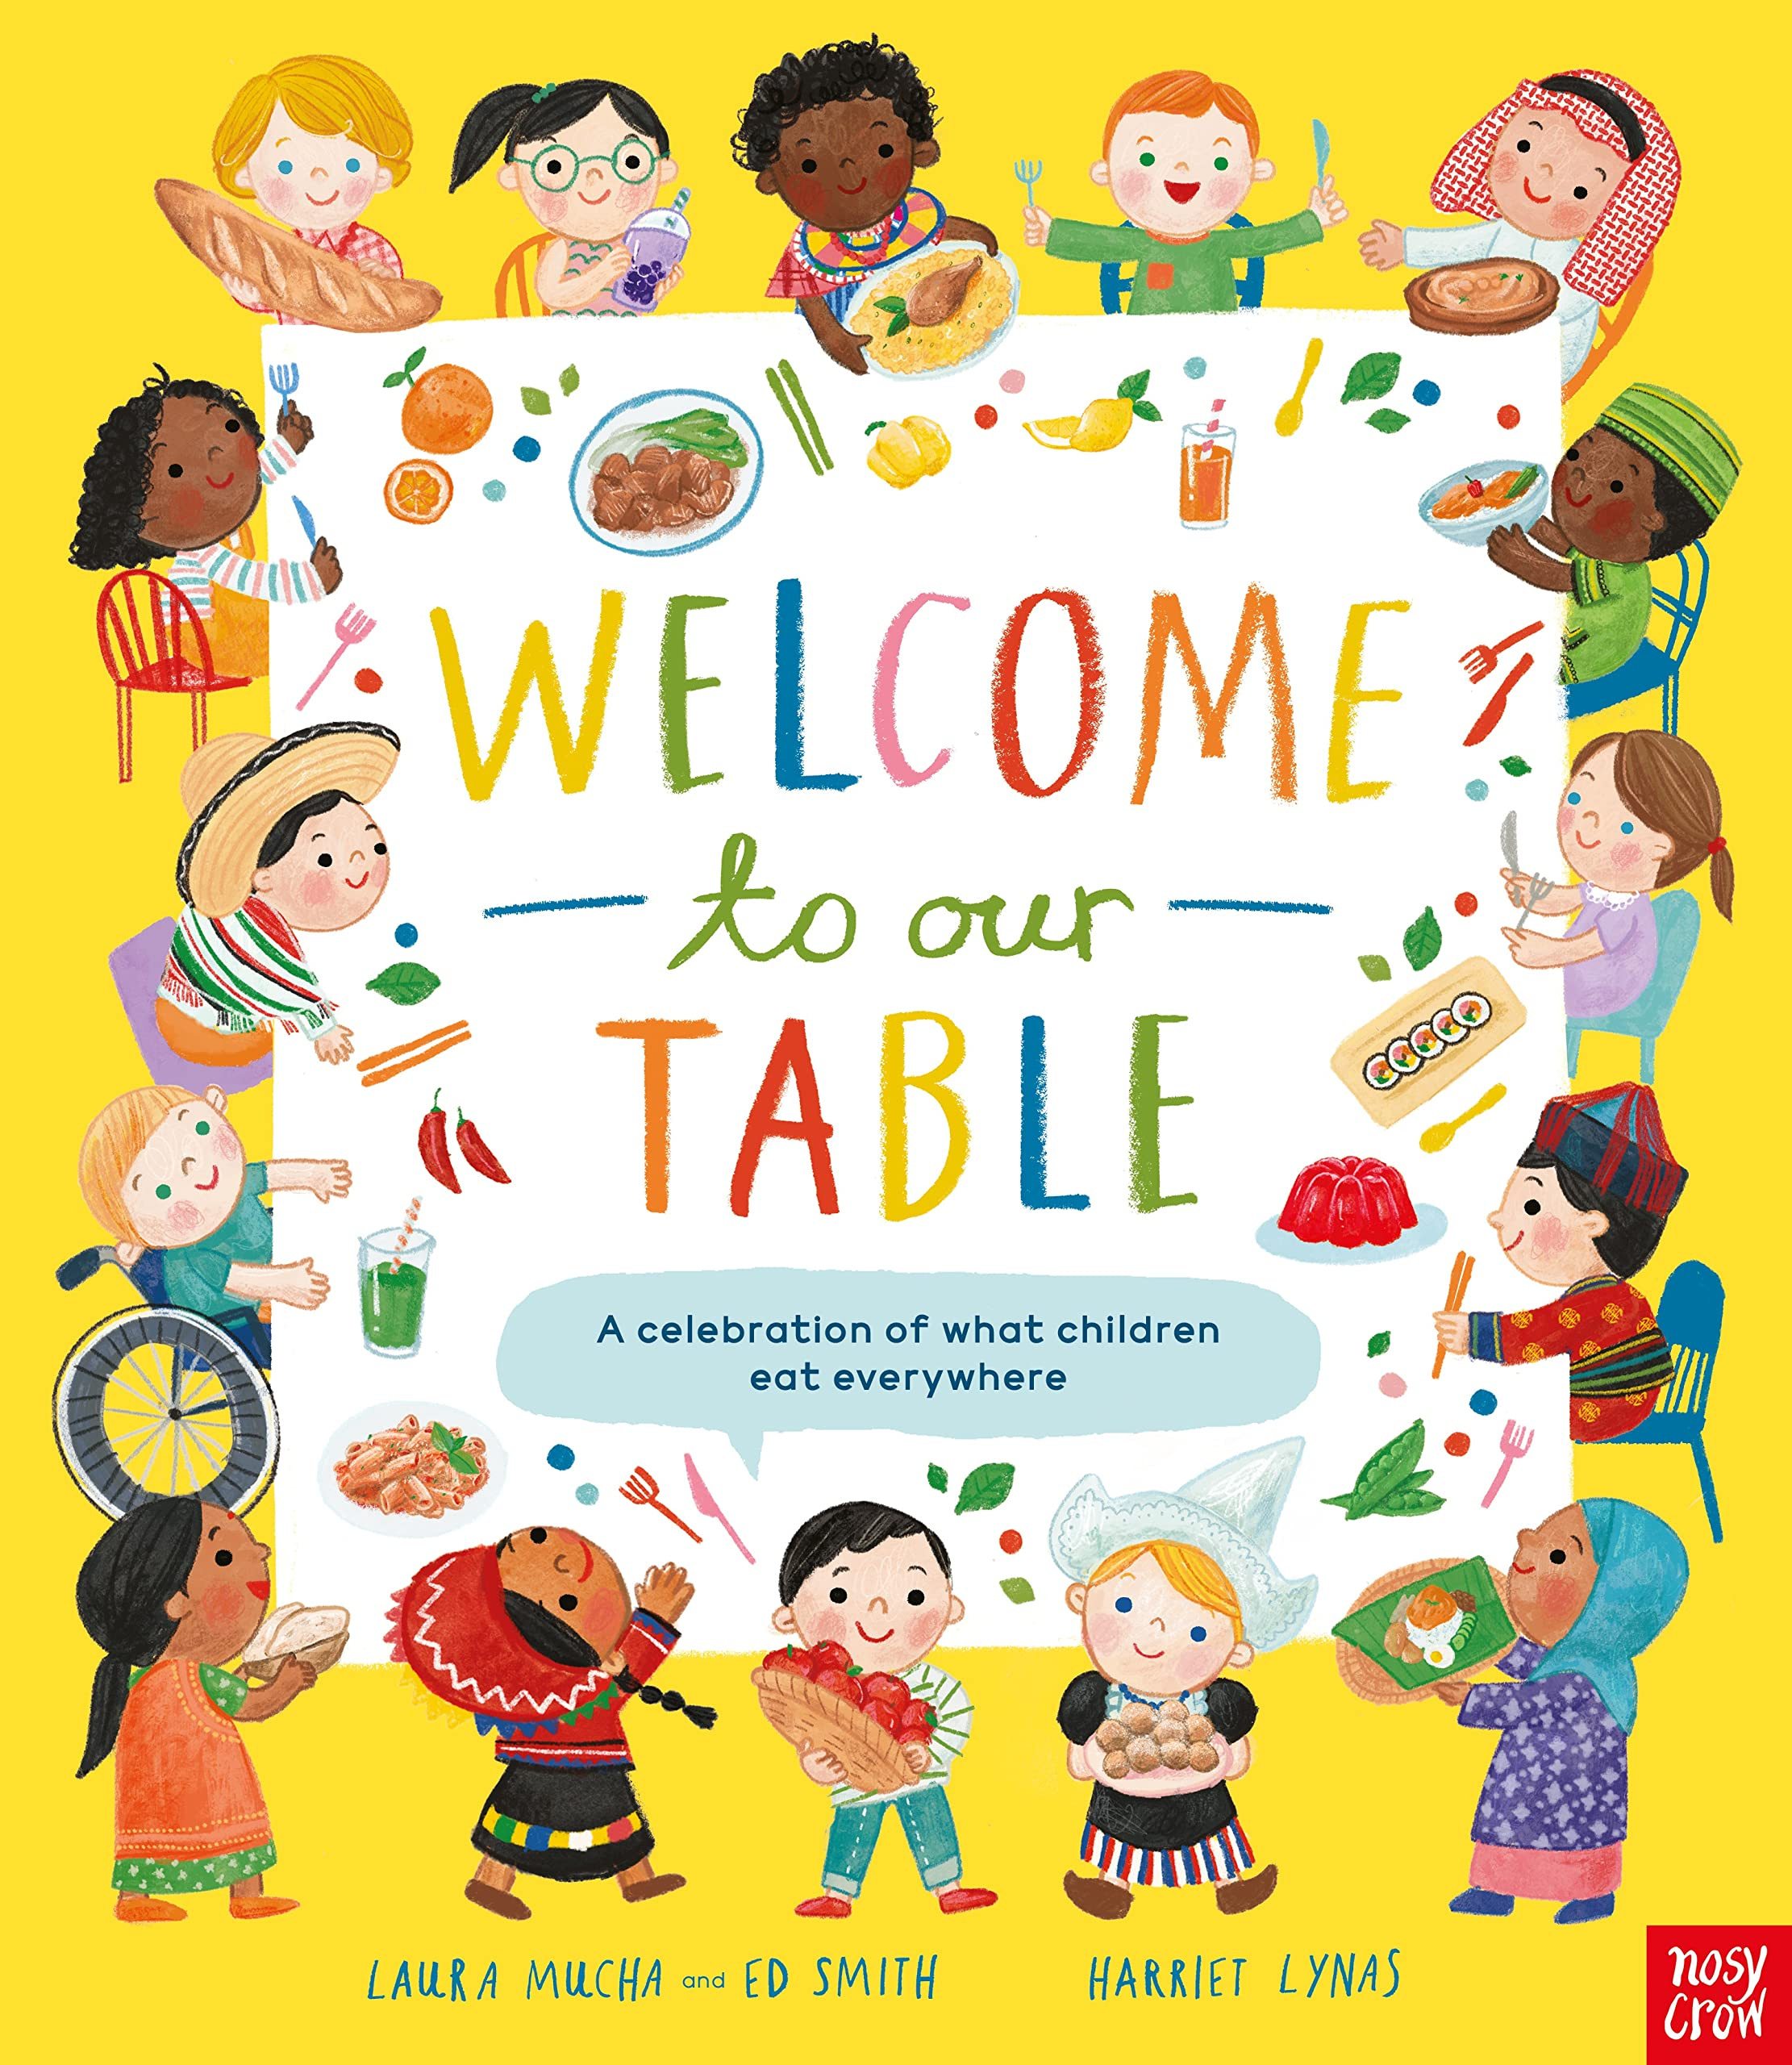 Welcome - The Good Table